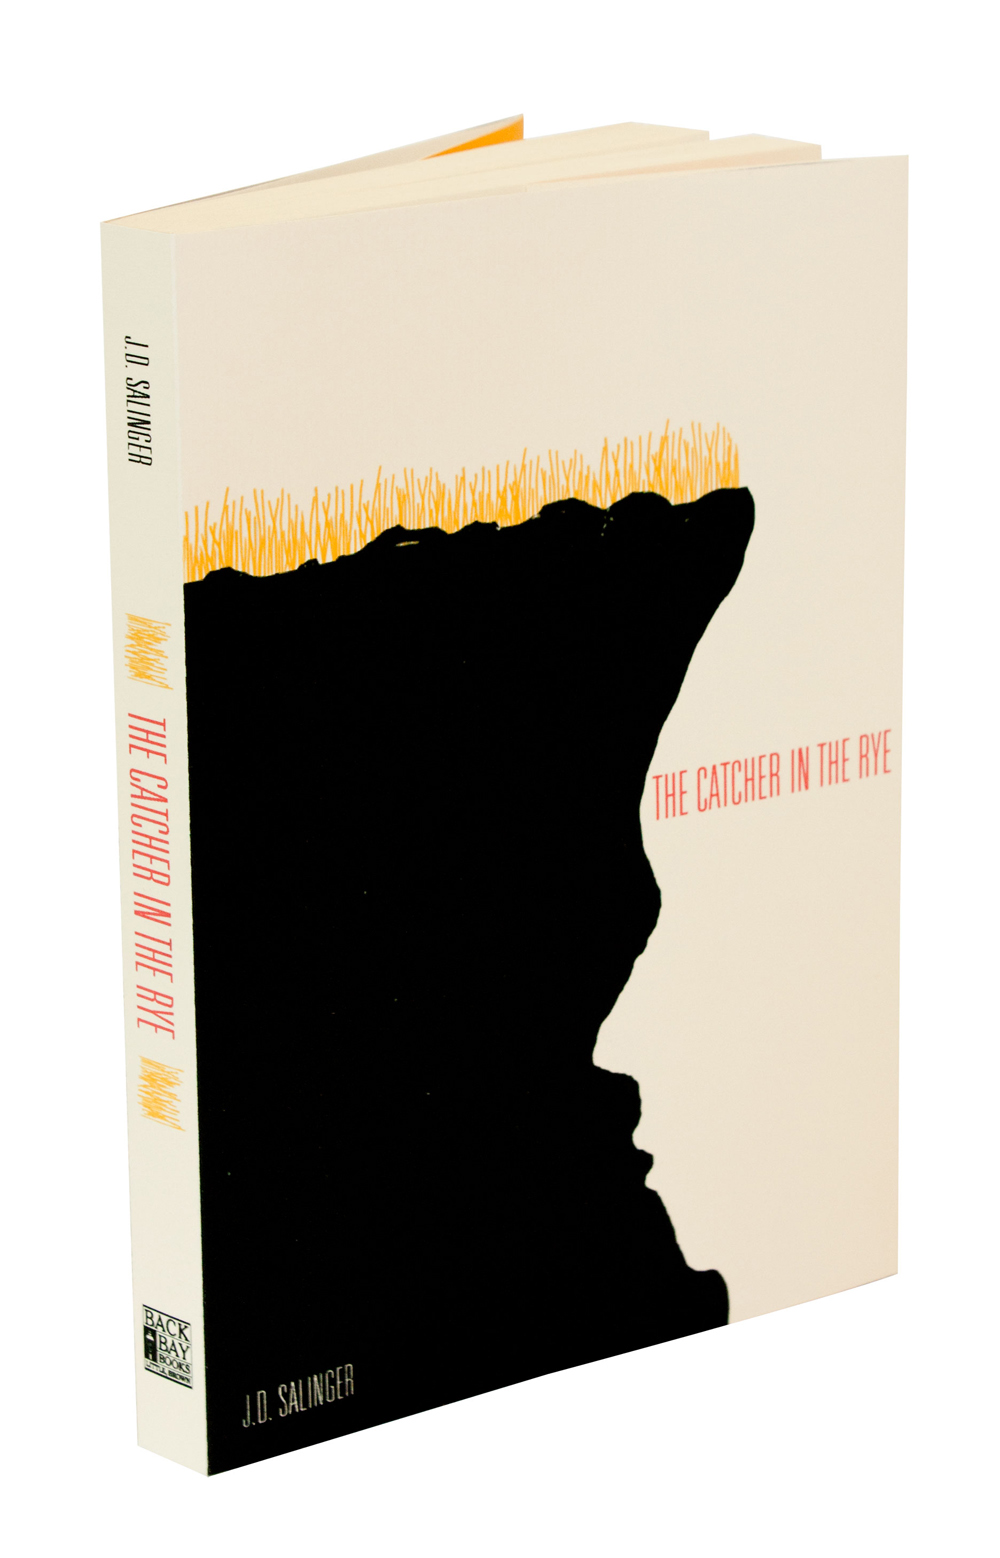 the catcher in the rye book jacket collateral design book design